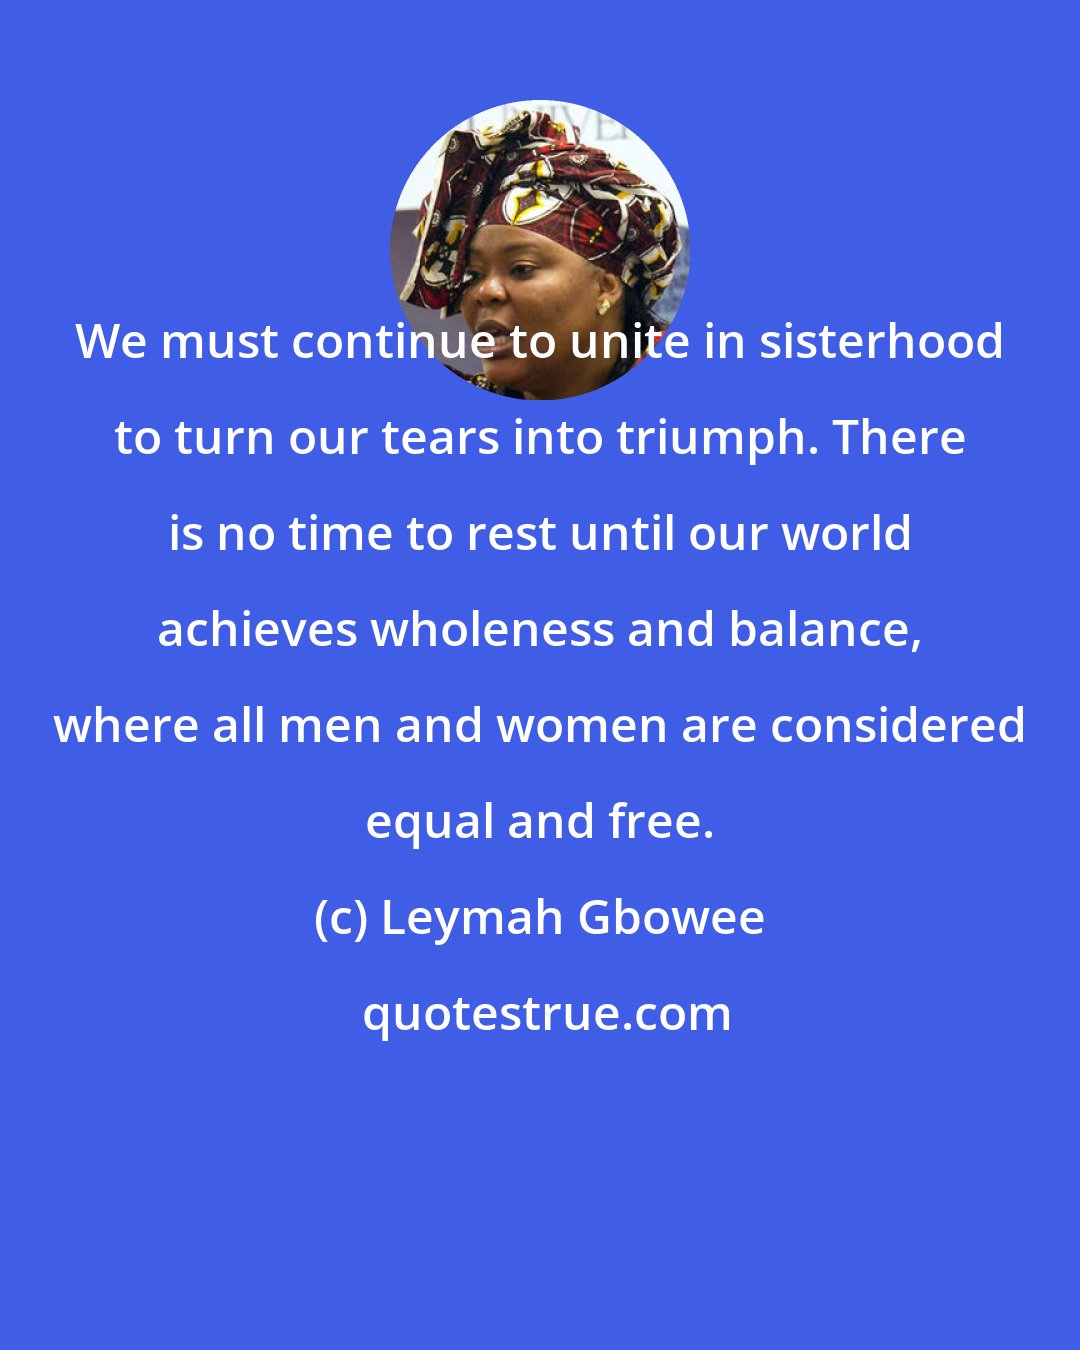 Leymah Gbowee: We must continue to unite in sisterhood to turn our tears into triumph. There is no time to rest until our world achieves wholeness and balance, where all men and women are considered equal and free.